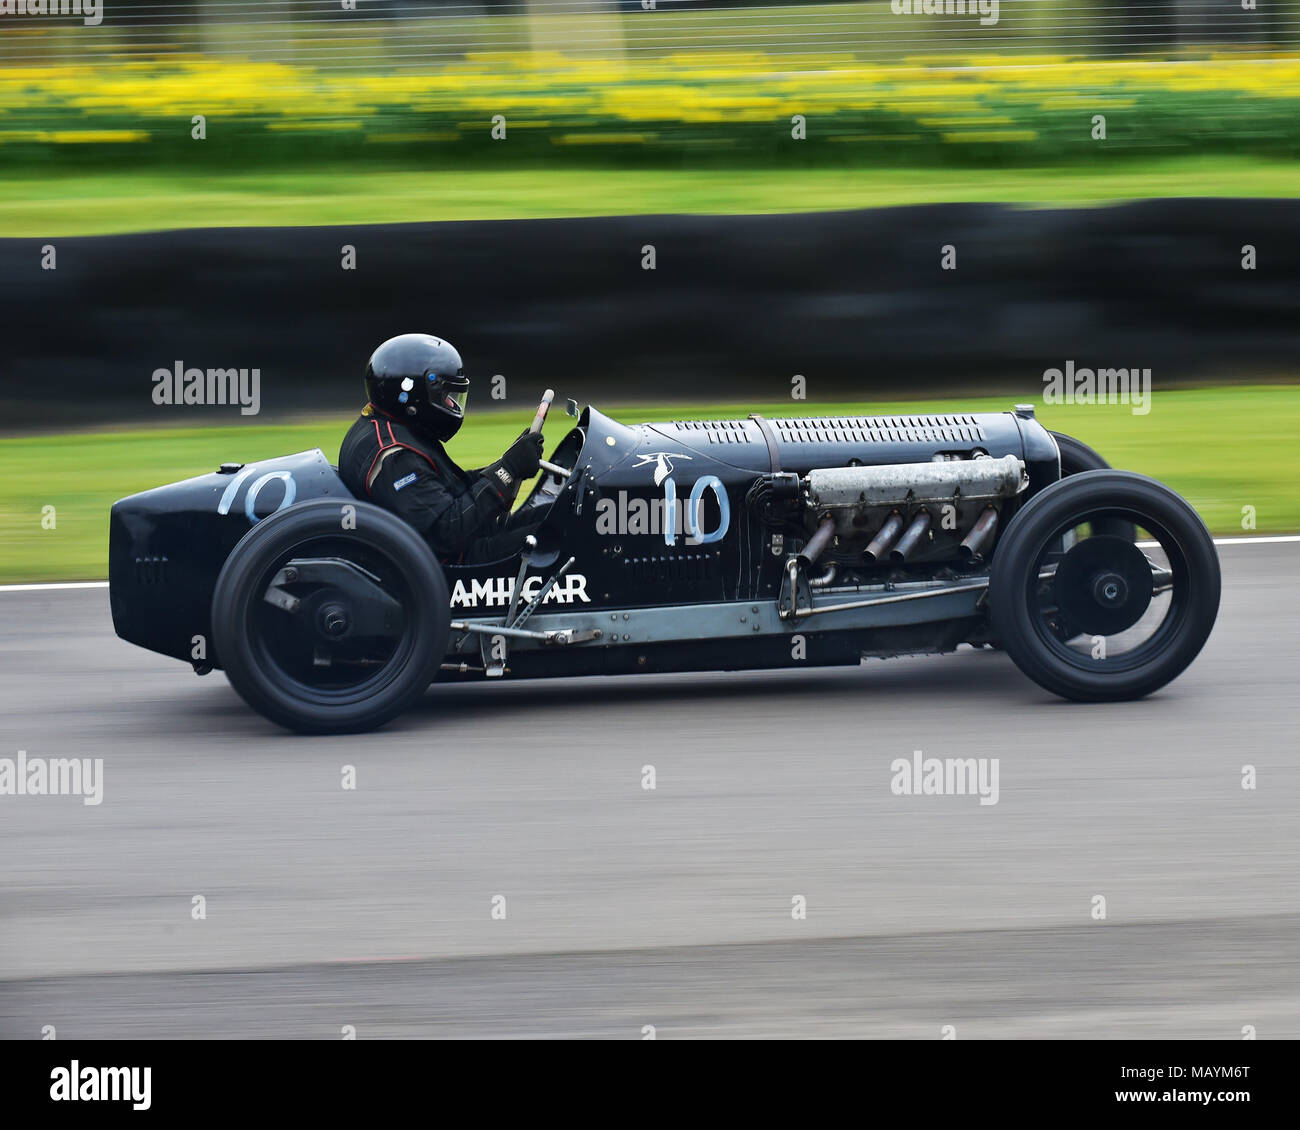 Tom Walker, Amilcar Hispano-Suiza, Bolster Cup, 76th Members Meeting, England, Goodwood, March 2018, Sussex, Autosport, cars, circuit racing, classic  Stock Photo